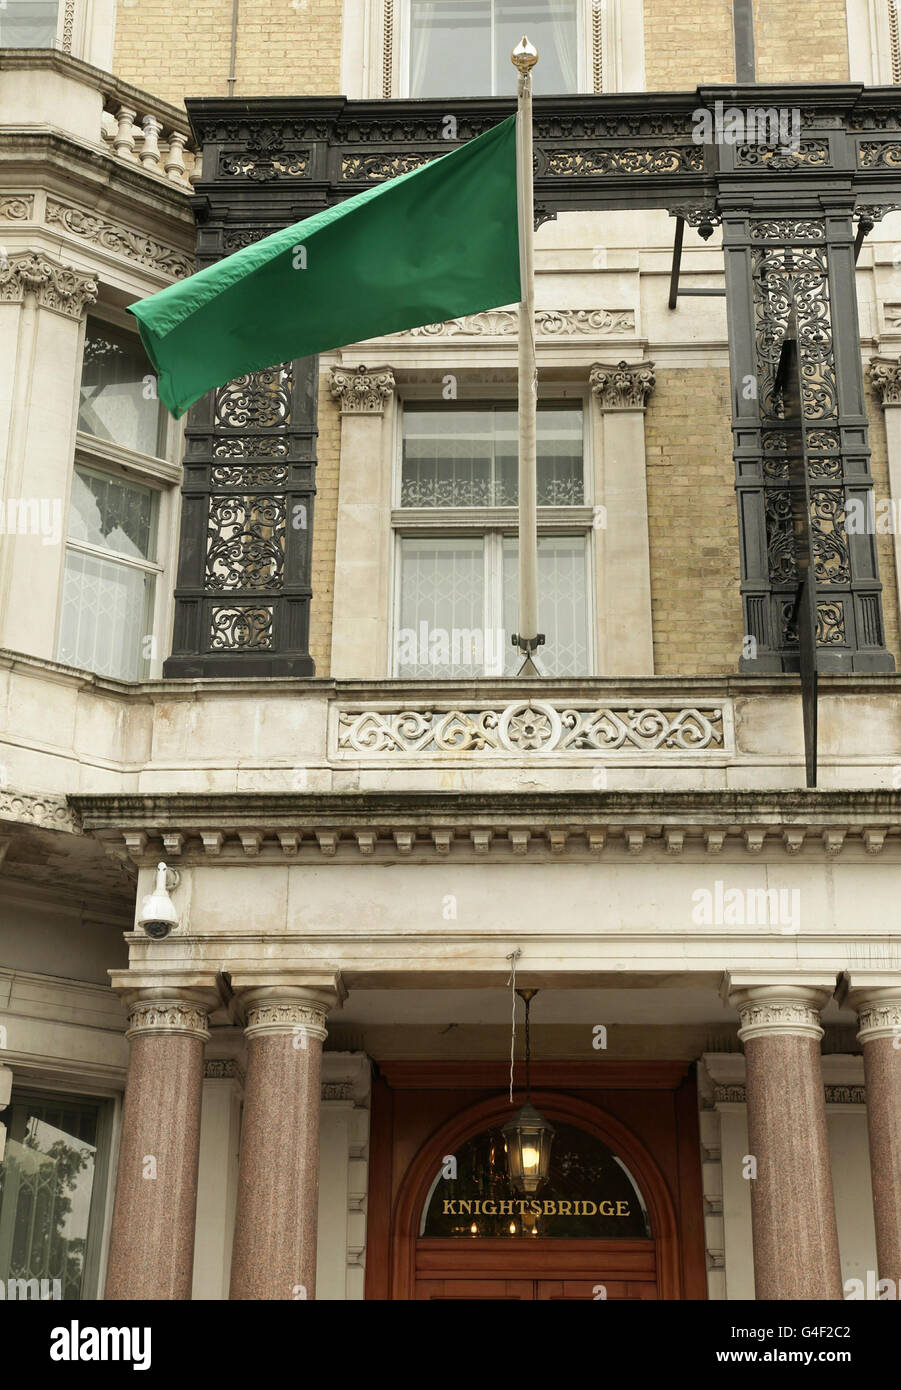 a-general-view-of-the-libyan-embassy-in-knightsbridge-london-which-G4F2C2.jpg